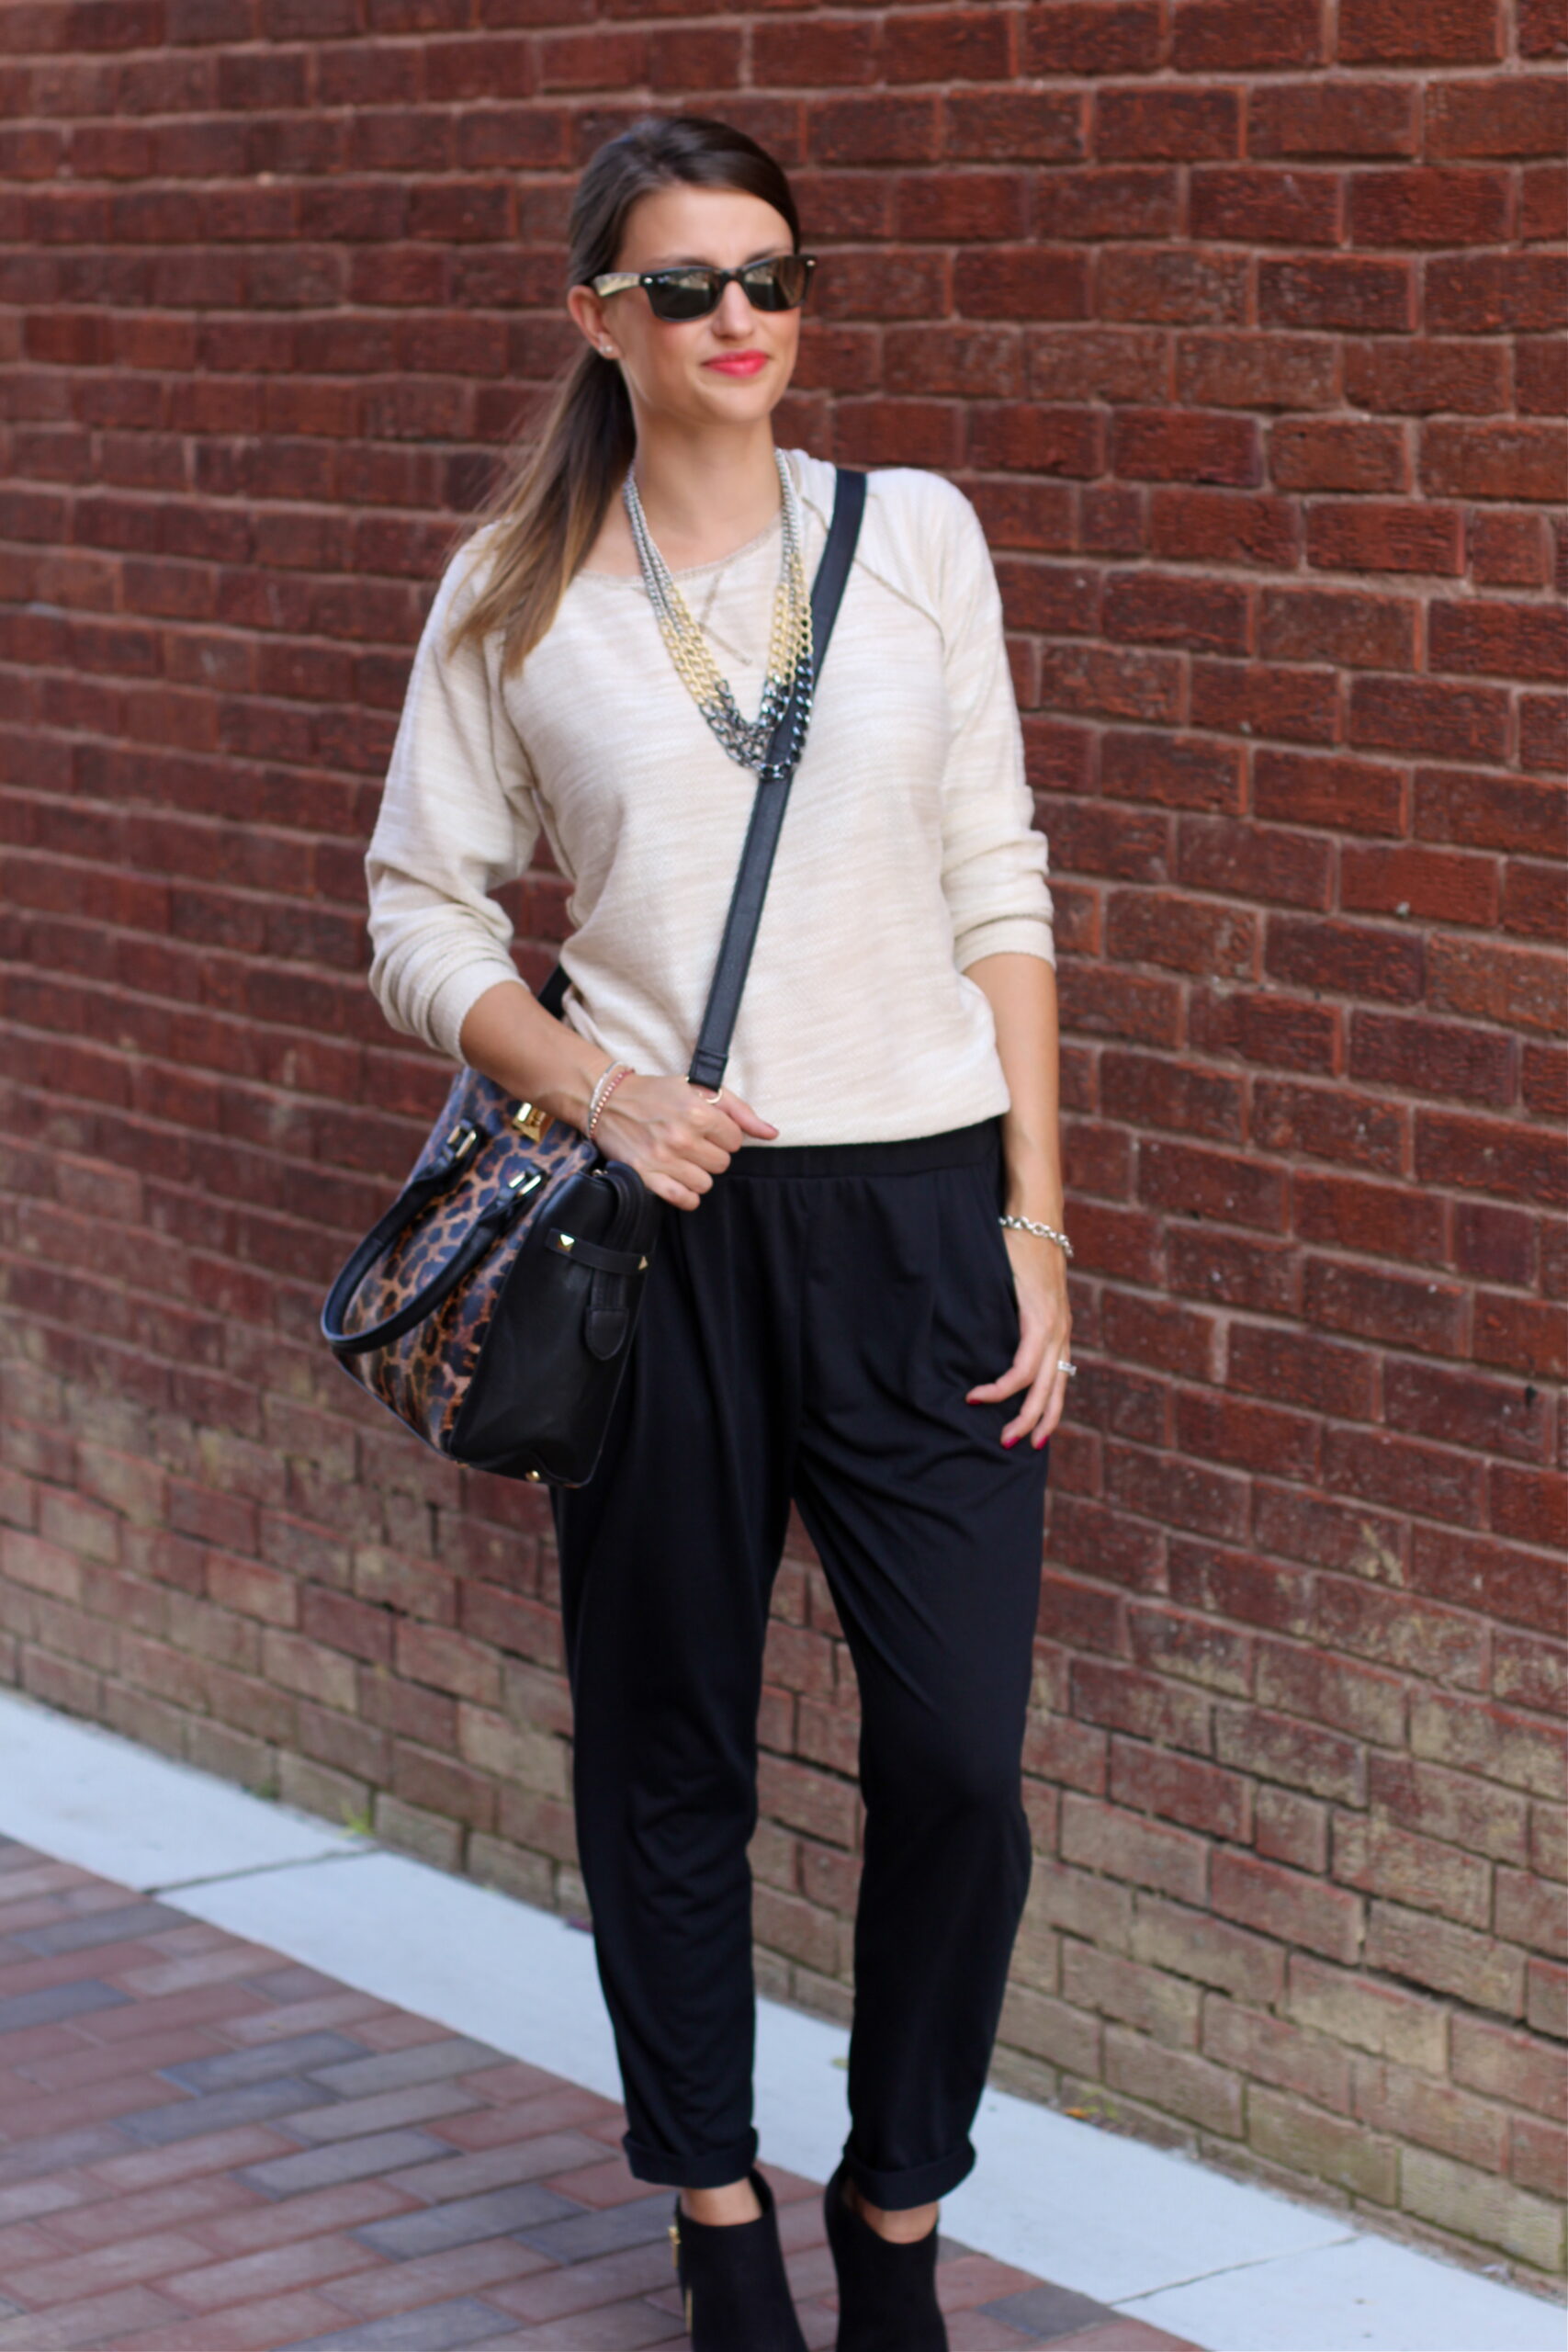 meijer_style_fall_fashion_sporty_chic_girl_about_columbus